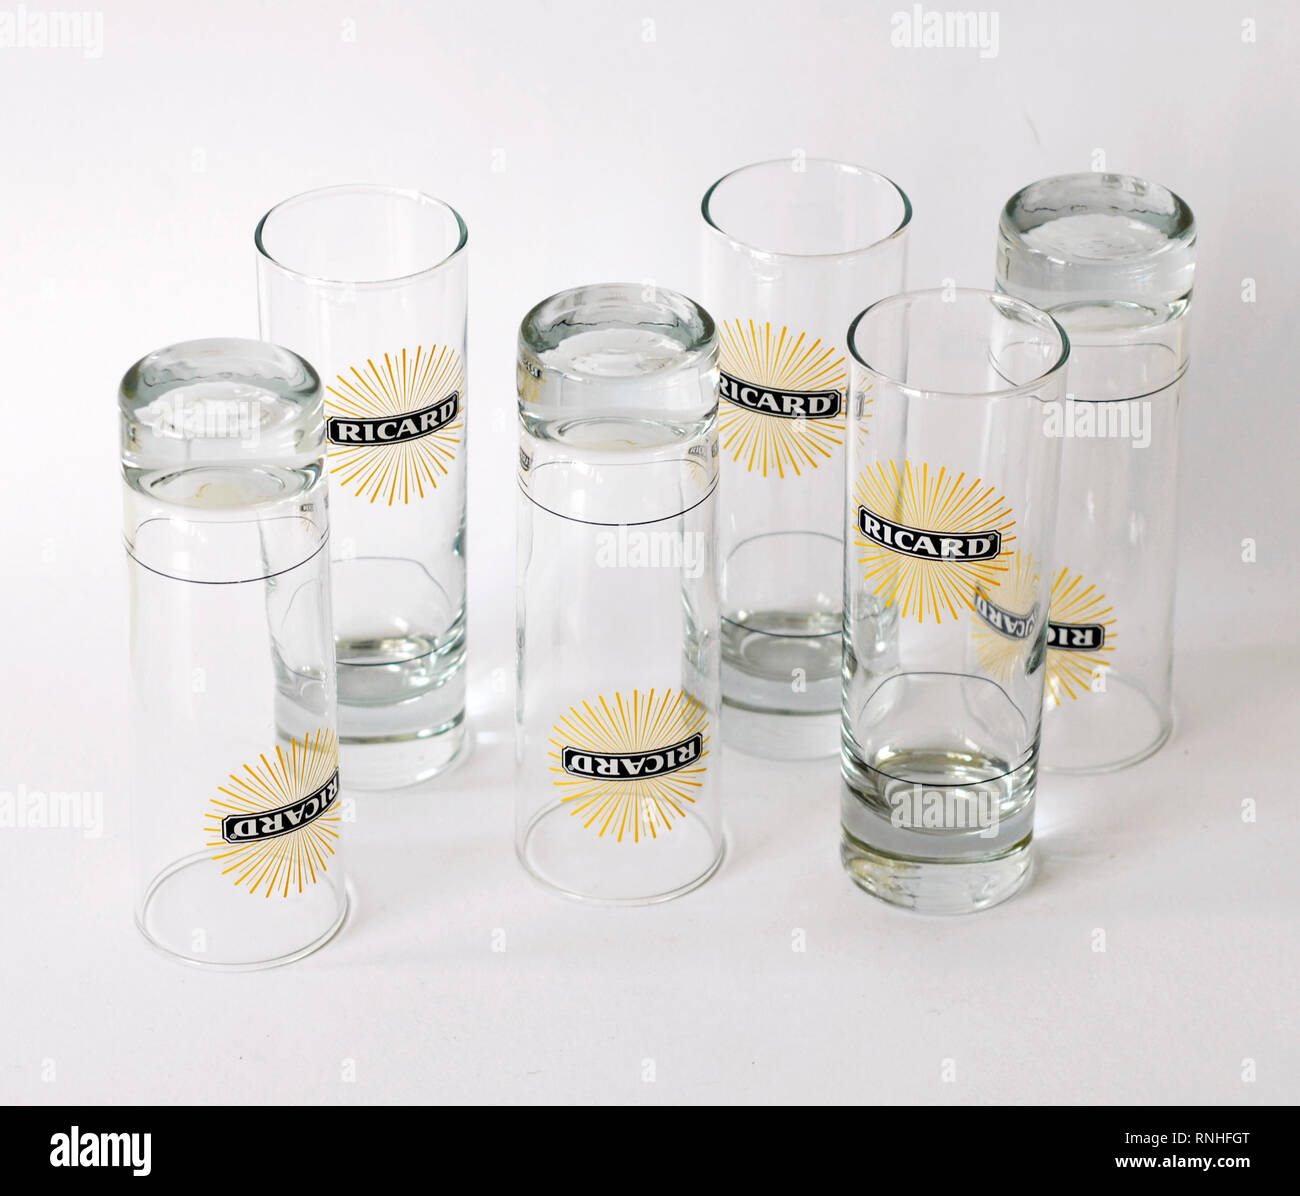 https://c8.alamy.com/comp/RNHFGT/set-of-six-tube-glasses-advertising-by-ricard-france-glass-with-the-logo-of-the-sun-and-a-line-to-indicate-the-measure-of-liquor-RNHFGT.jpg